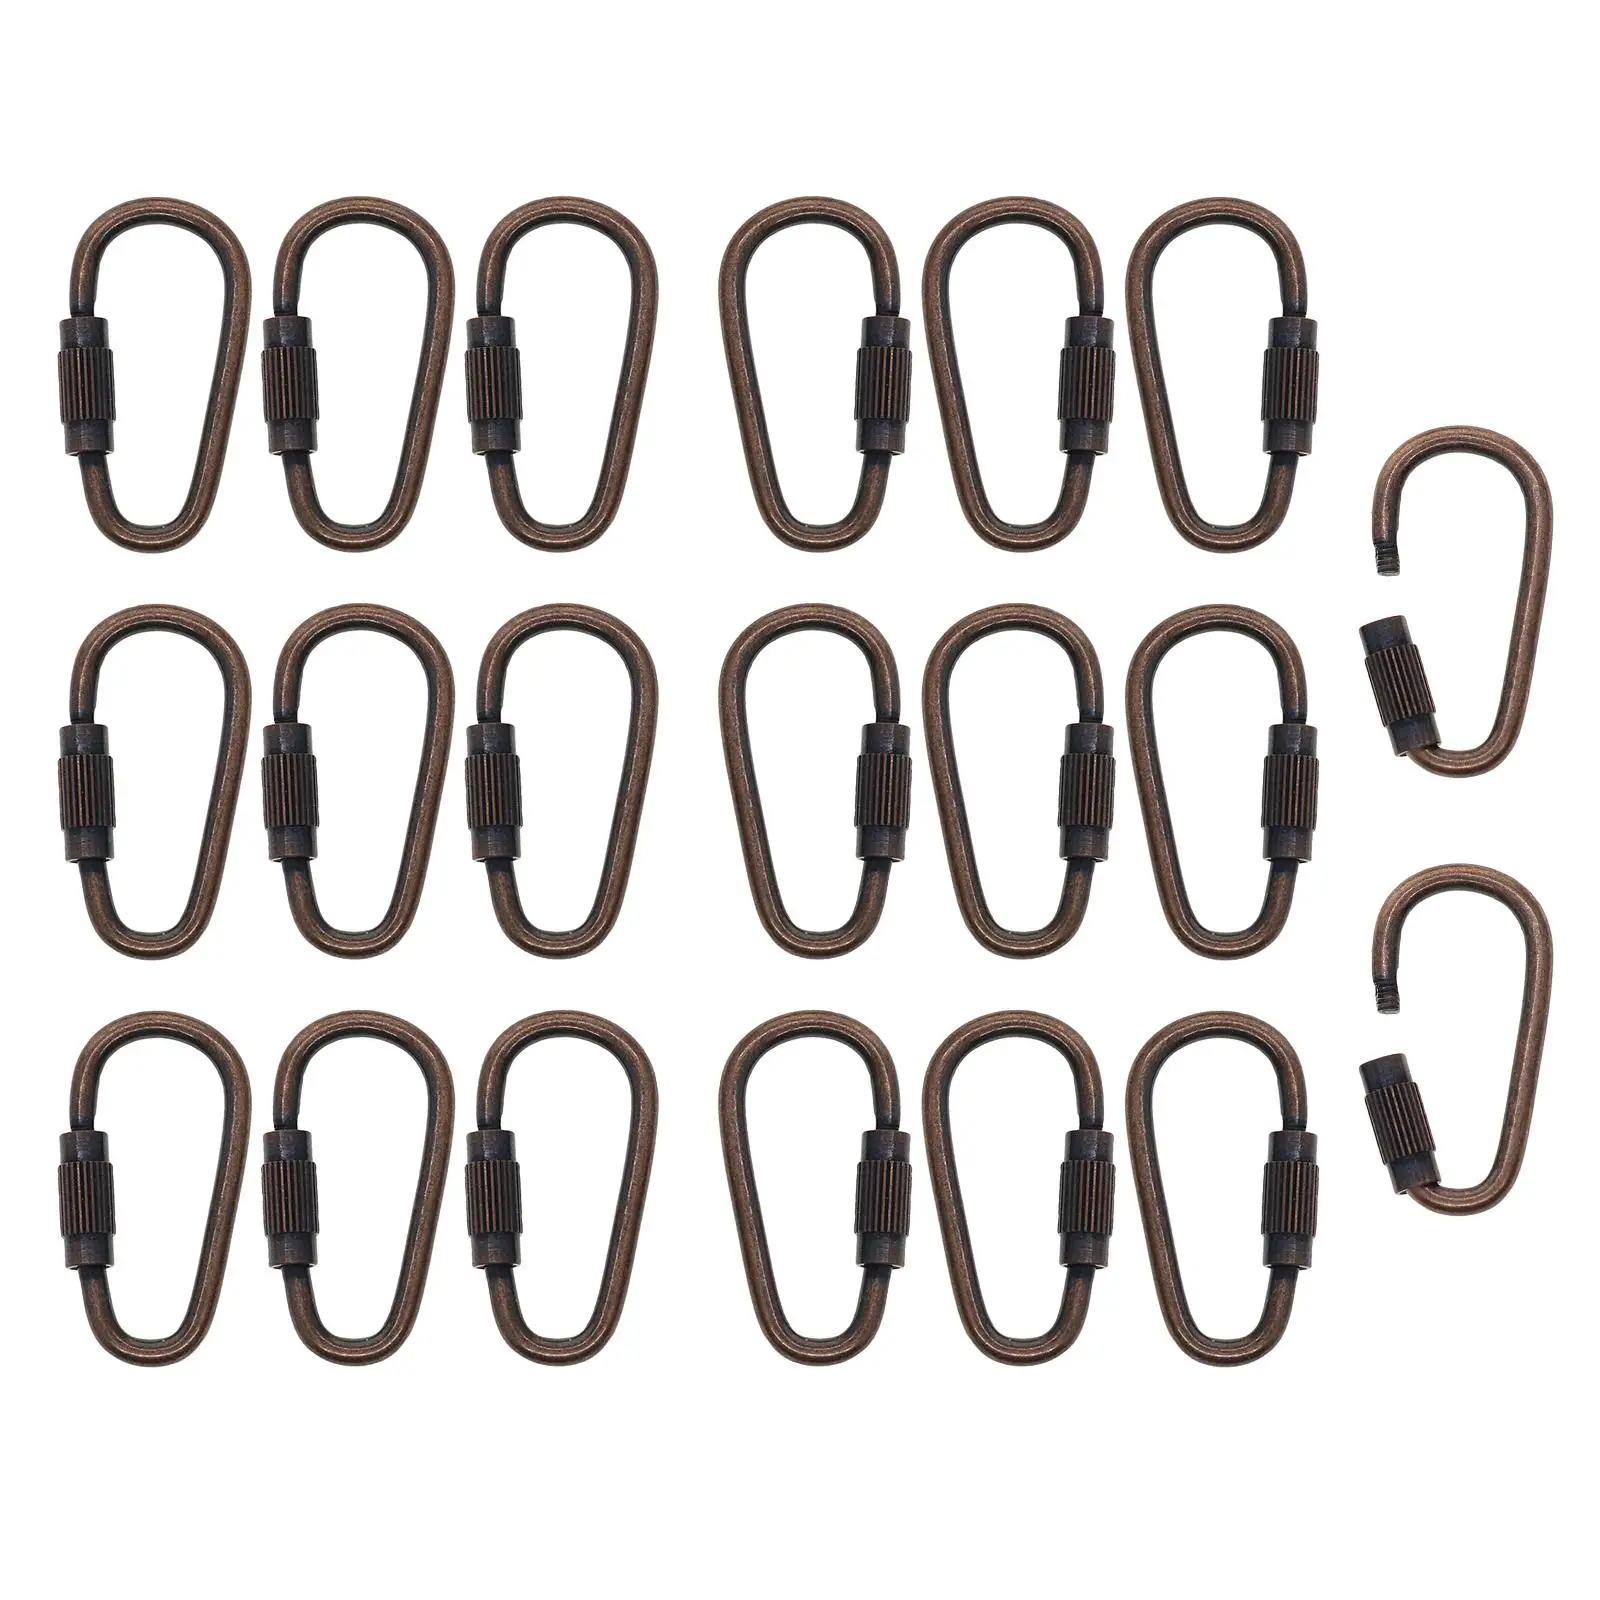 20 Pieces Mini Steel Locking Clips Durable D Ring Carabiners DIY Keychain Clips